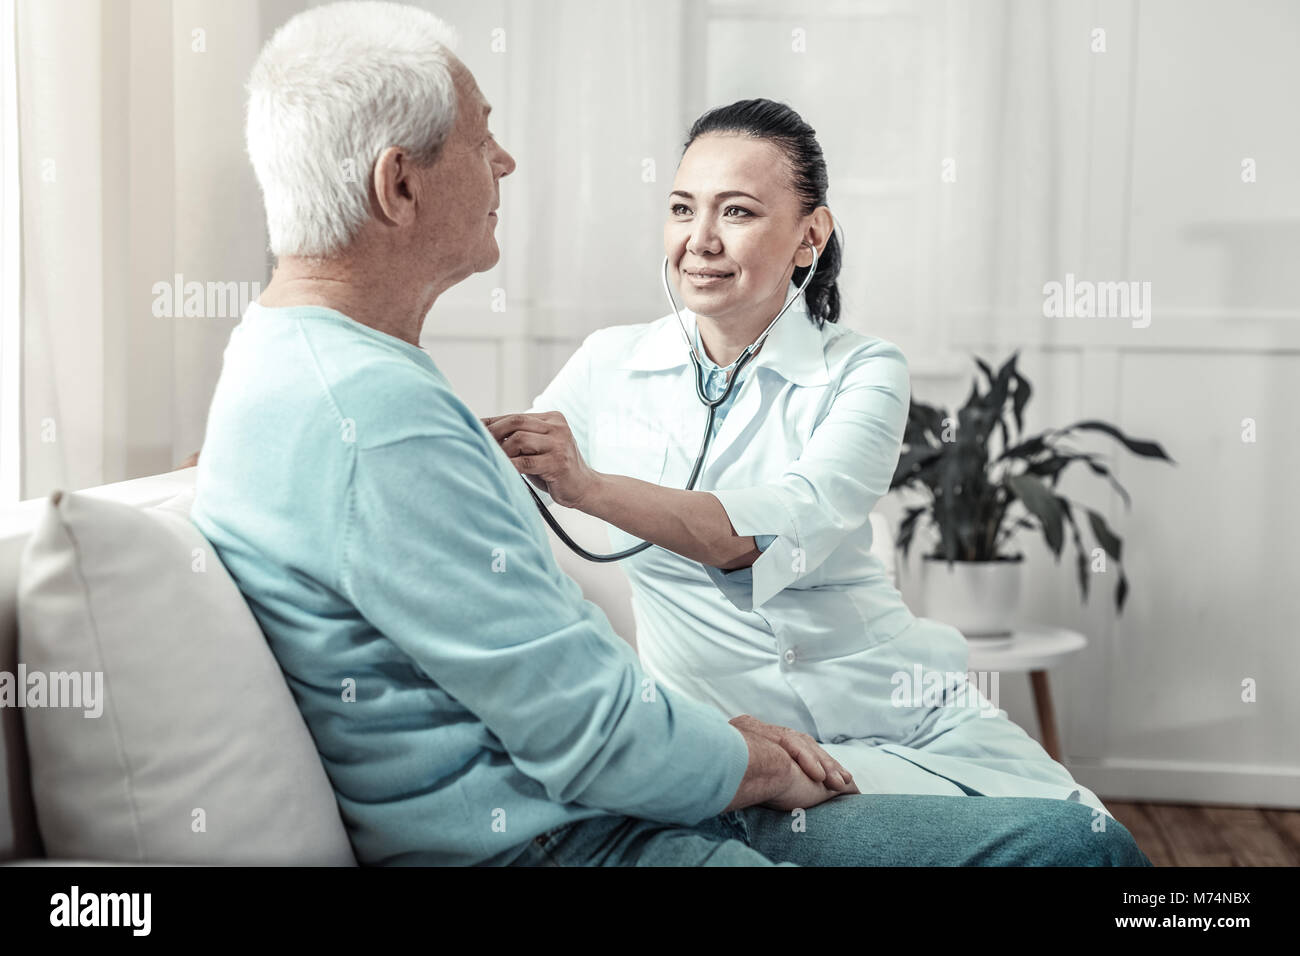 Young skilled nurse sitting and listening to the patients lungs. Stock Photo